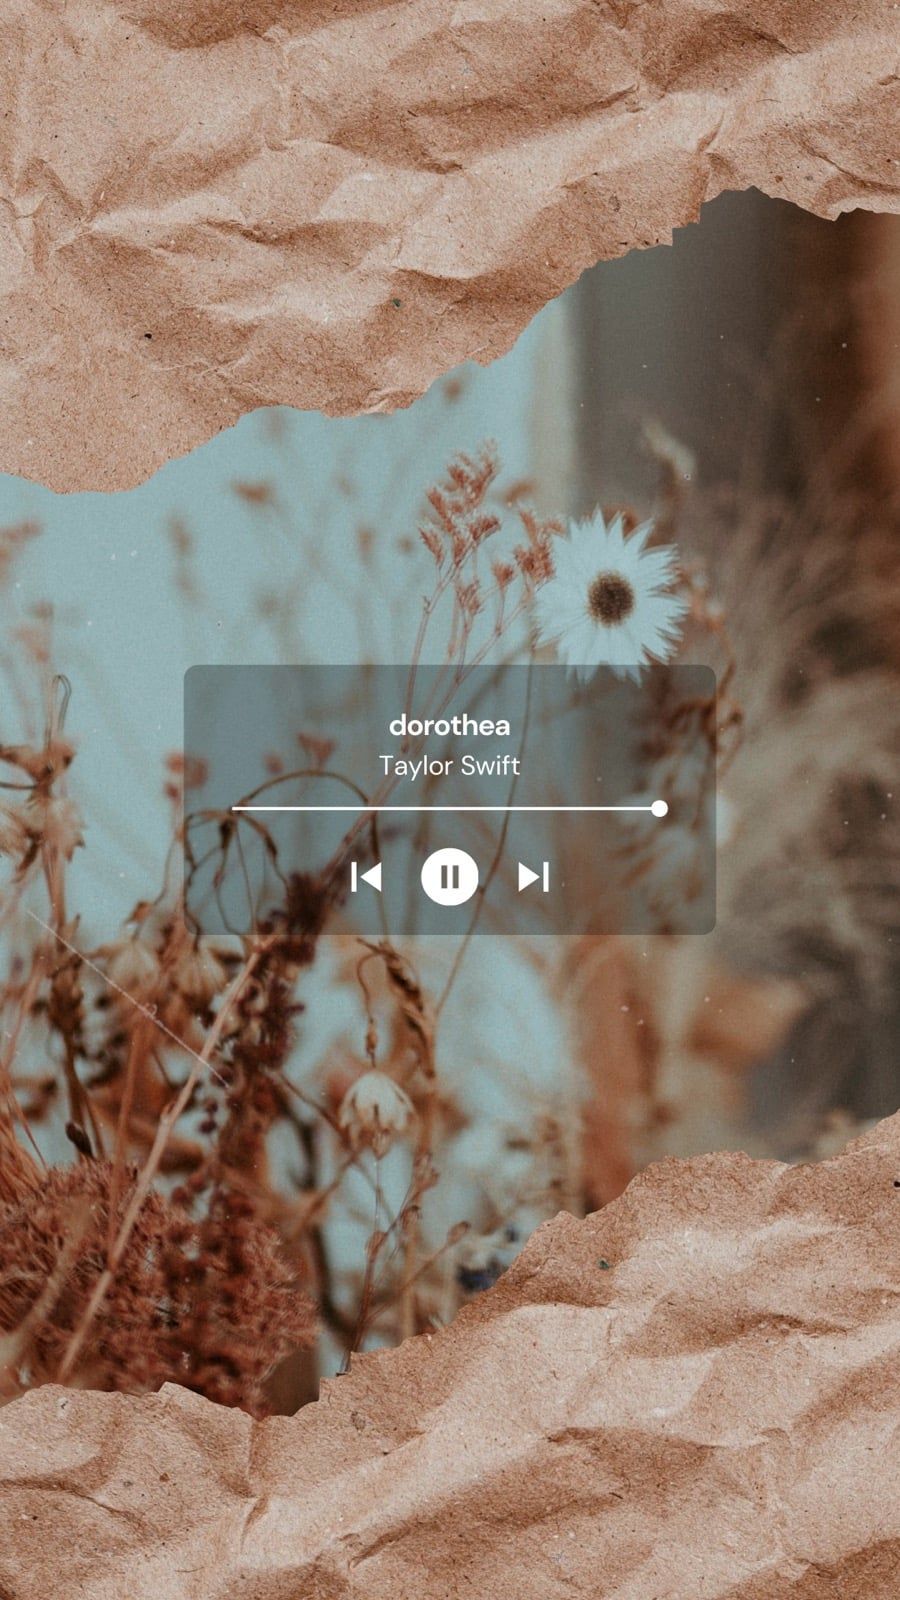 Aesthetic phone background of a flower with a music player. - Taylor Swift